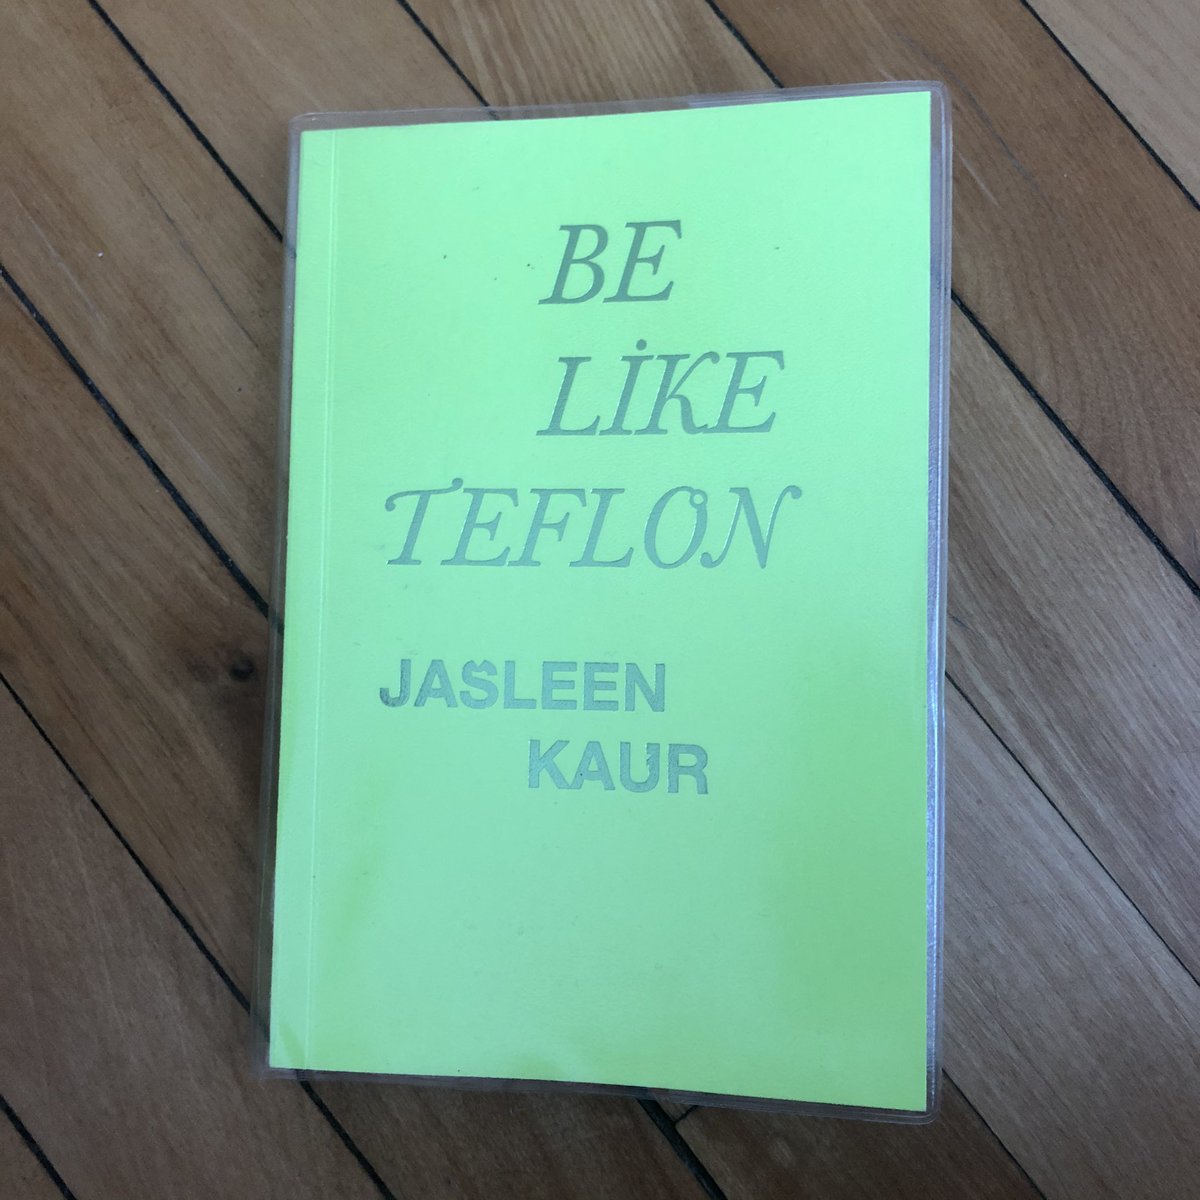 50/52Be Like Teflon by Jasleen Kaur. Published by the Glasgow Women’s Library (where I bought it last June). Conversations and recipes from East-Asian women living in Glasgow.  #52booksin52weeks  #2020books  #booksof2020  #pandemicreading